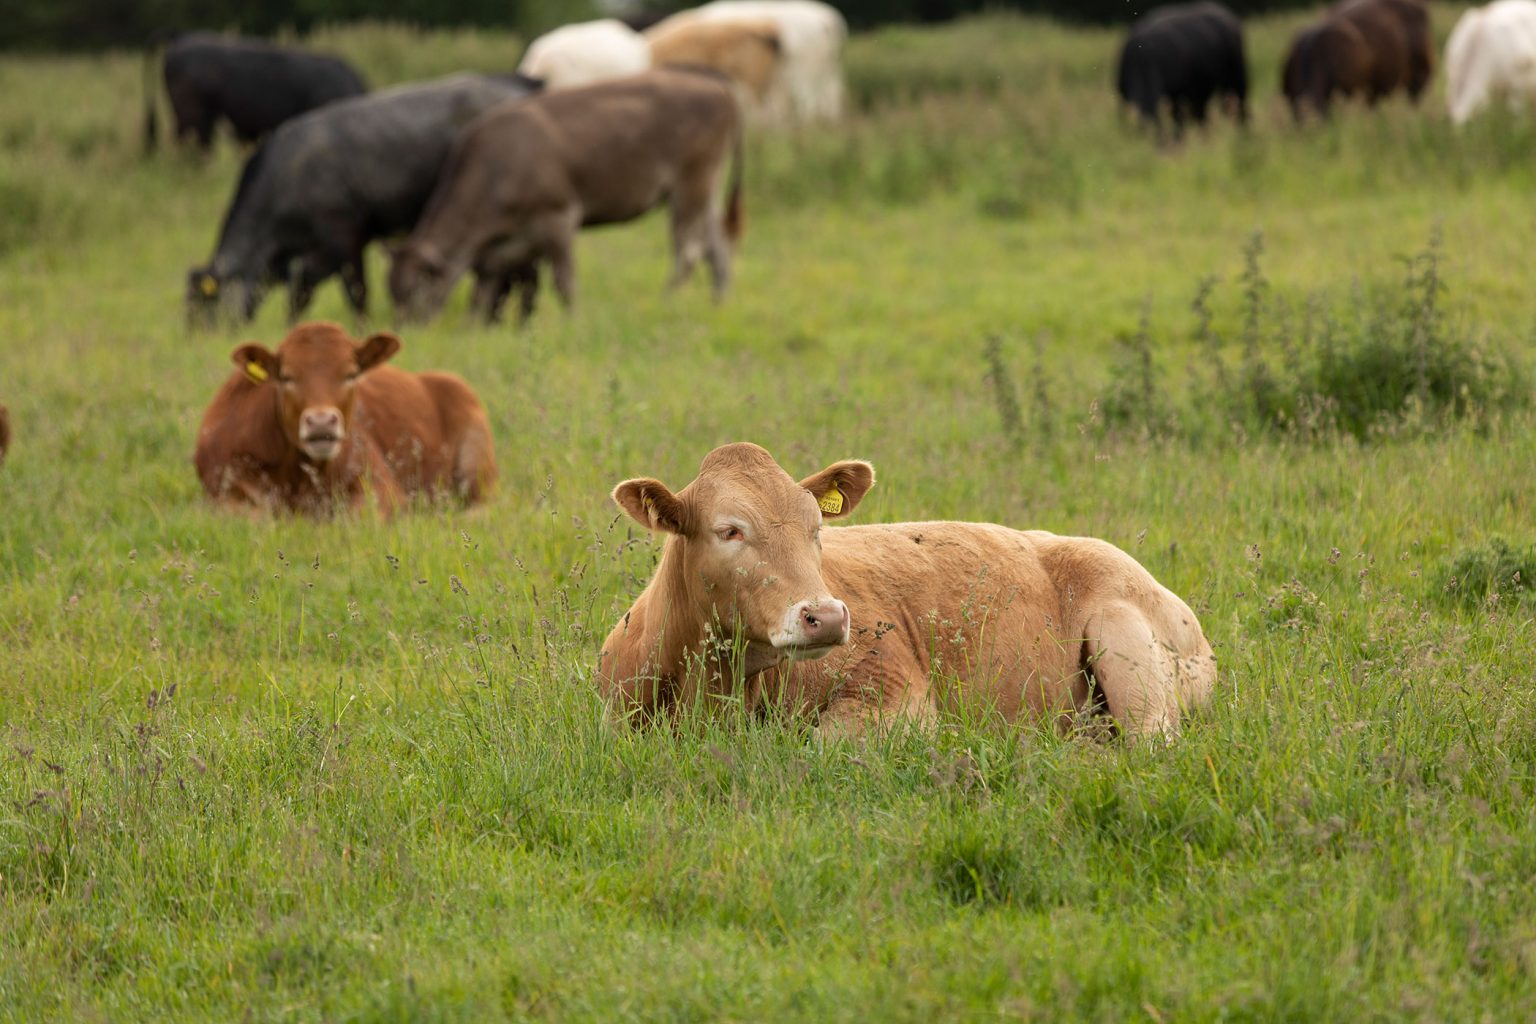 Tagged cattle graze and rest in a pasture